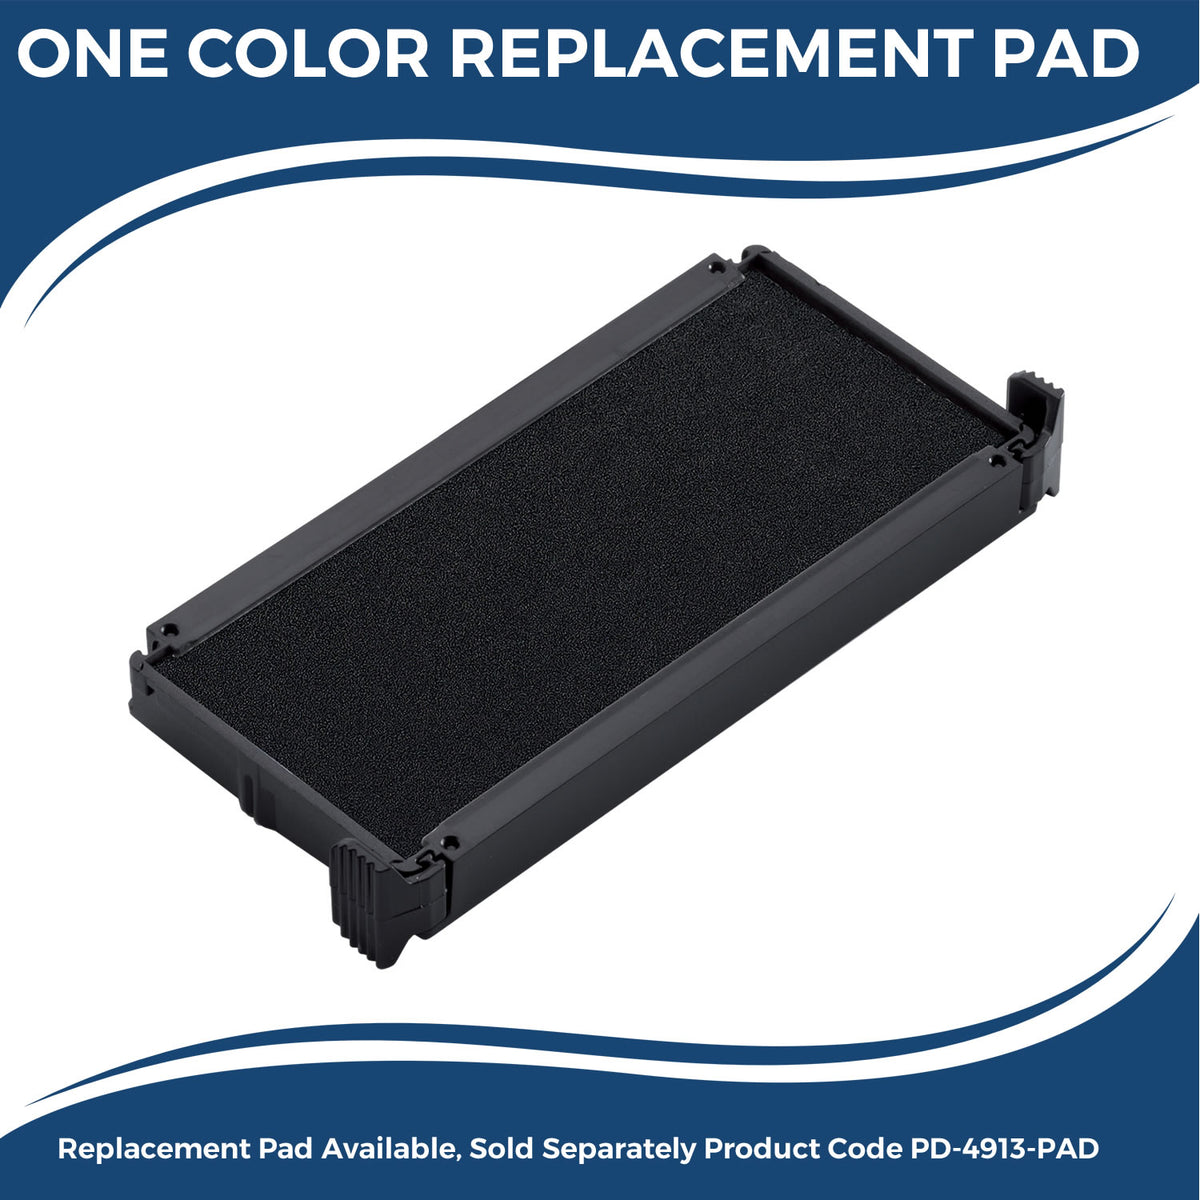 Large Self-Inking PAL Stamp 4954S Large Replacment Pad